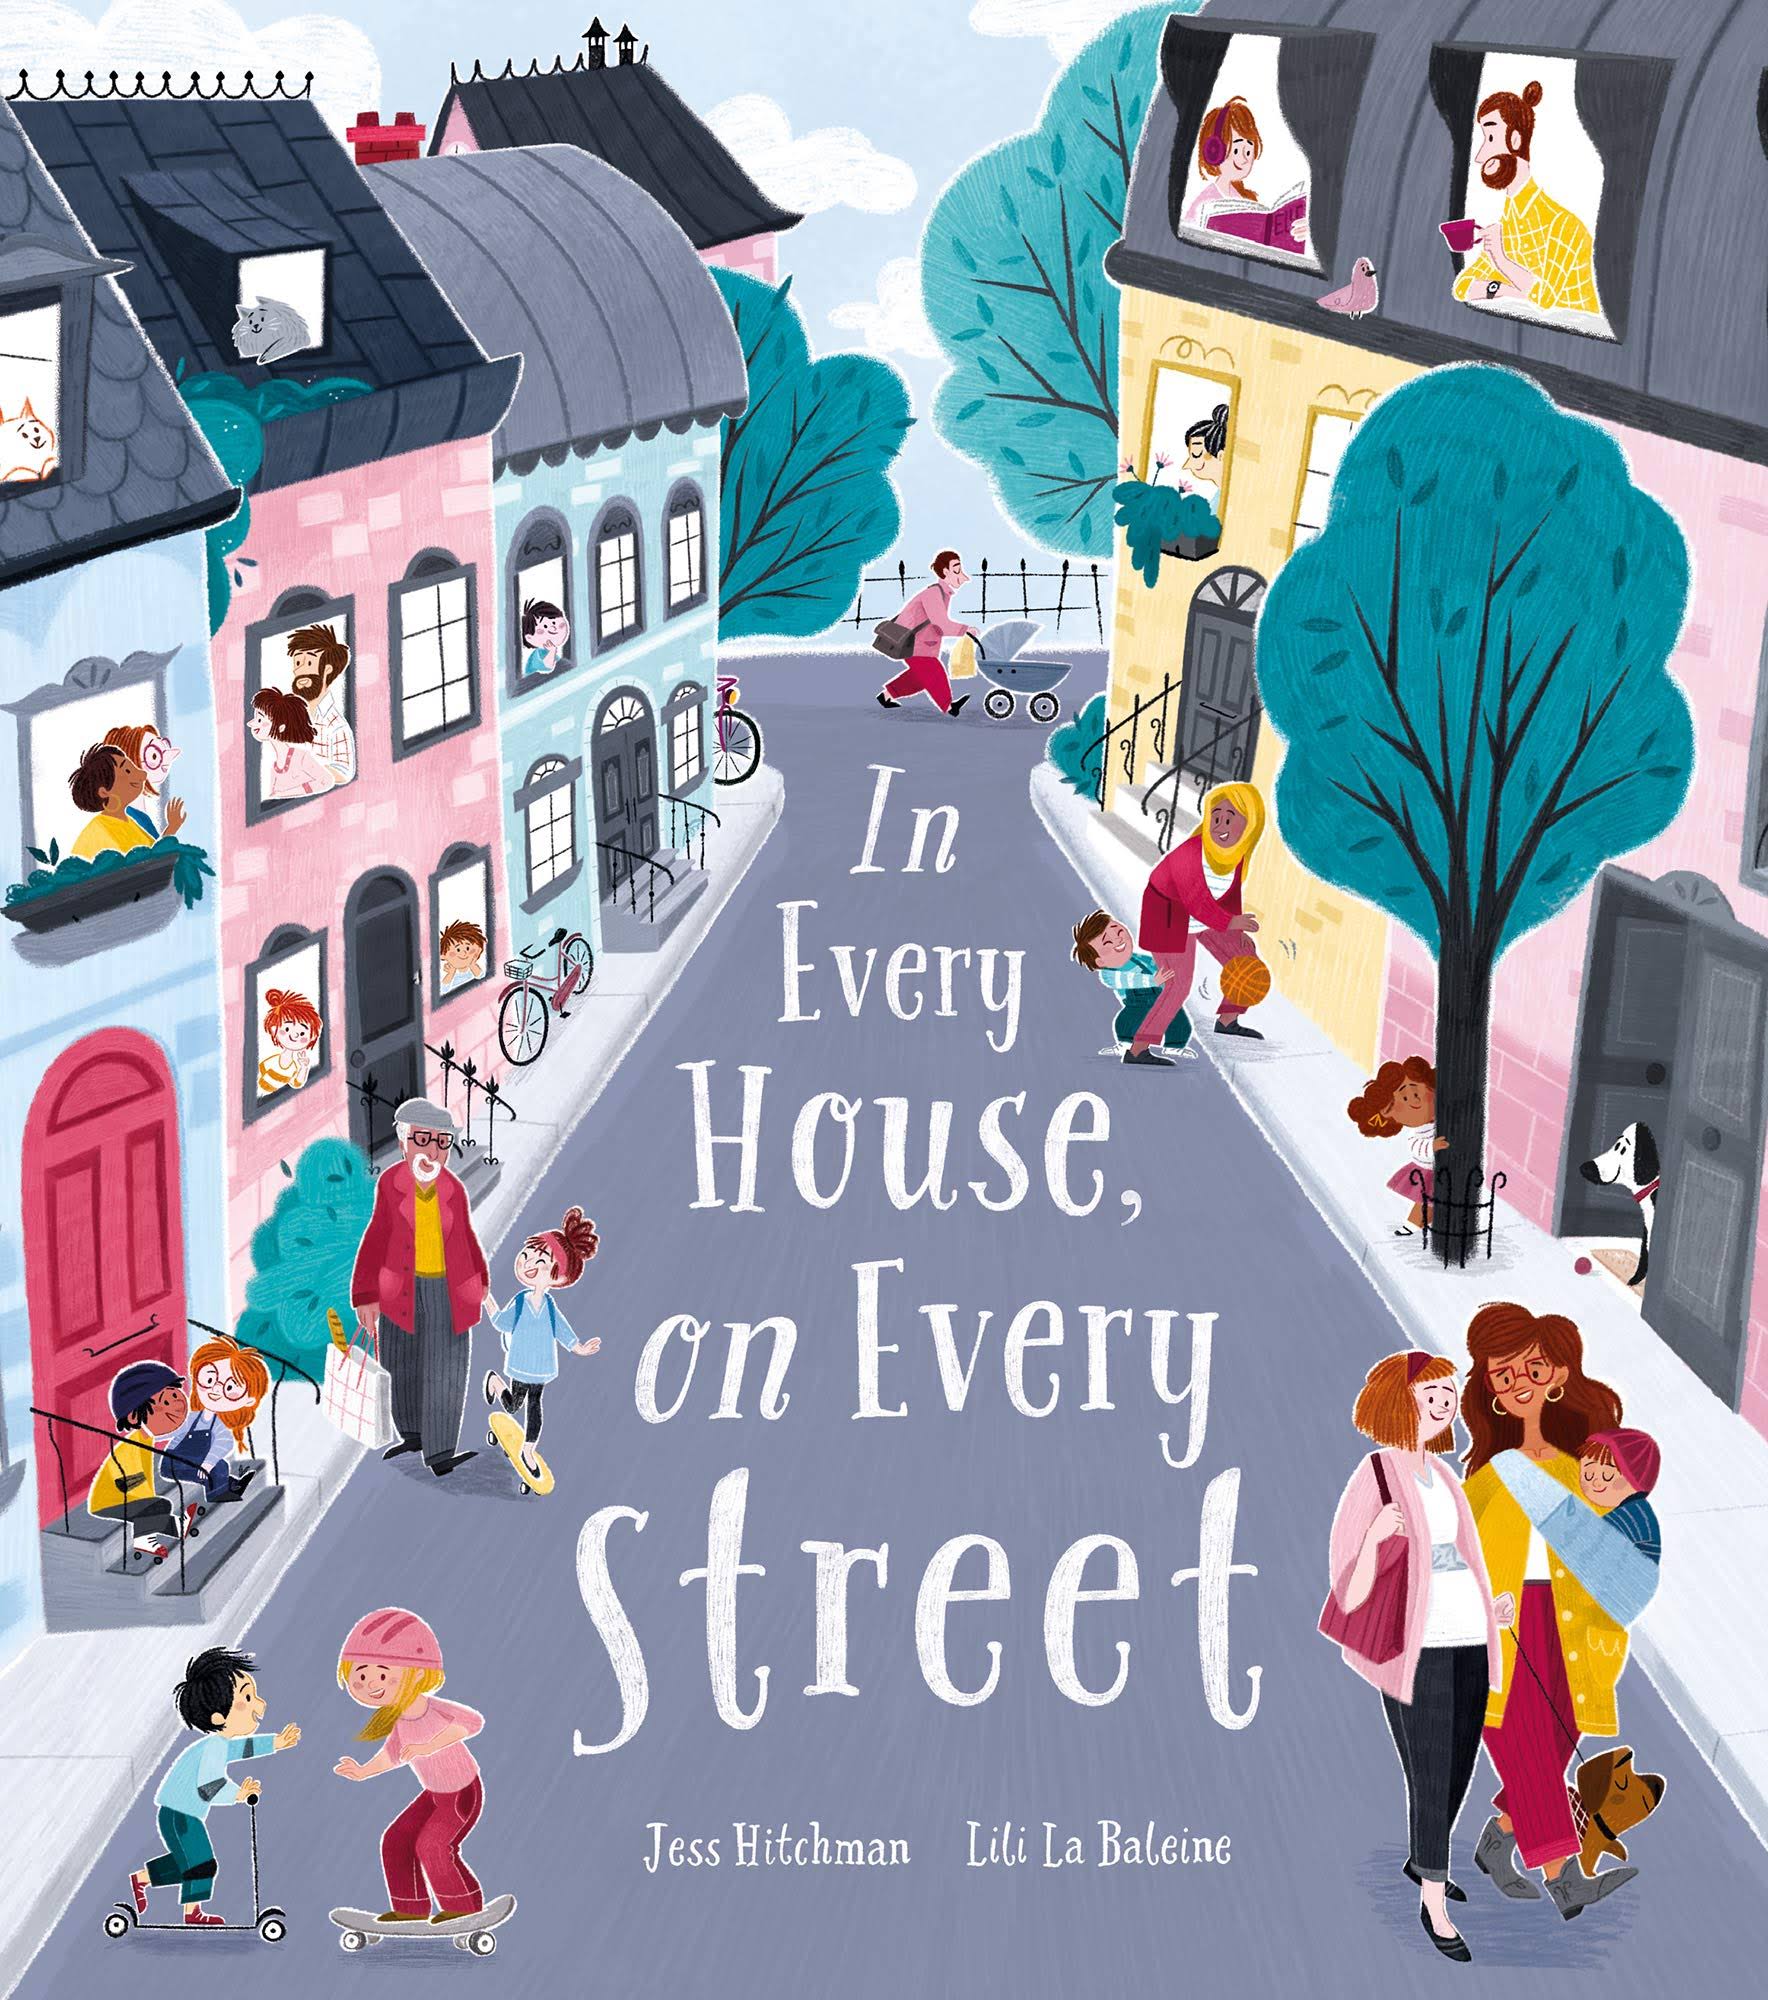 In Every House, on Every Street [Book]